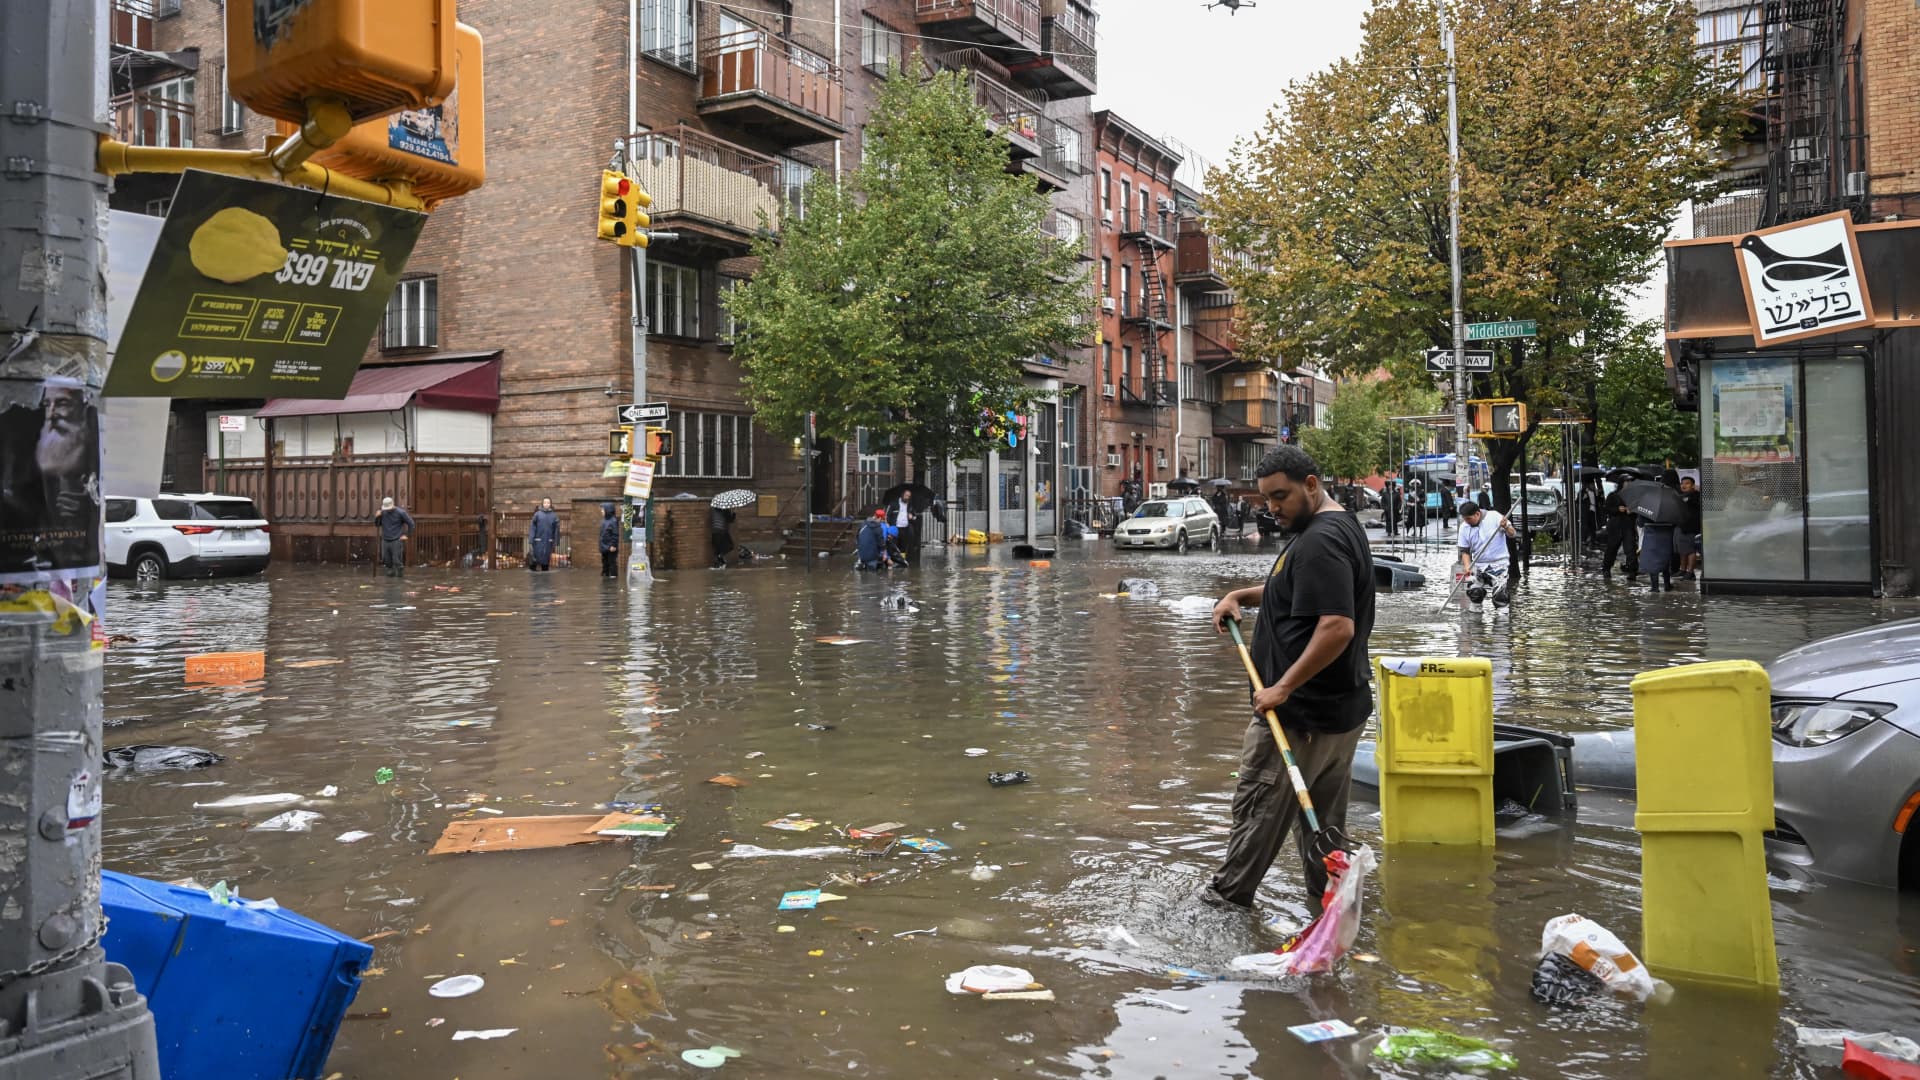 NYC Climate Chief: We're playing catch-up on extreme weather